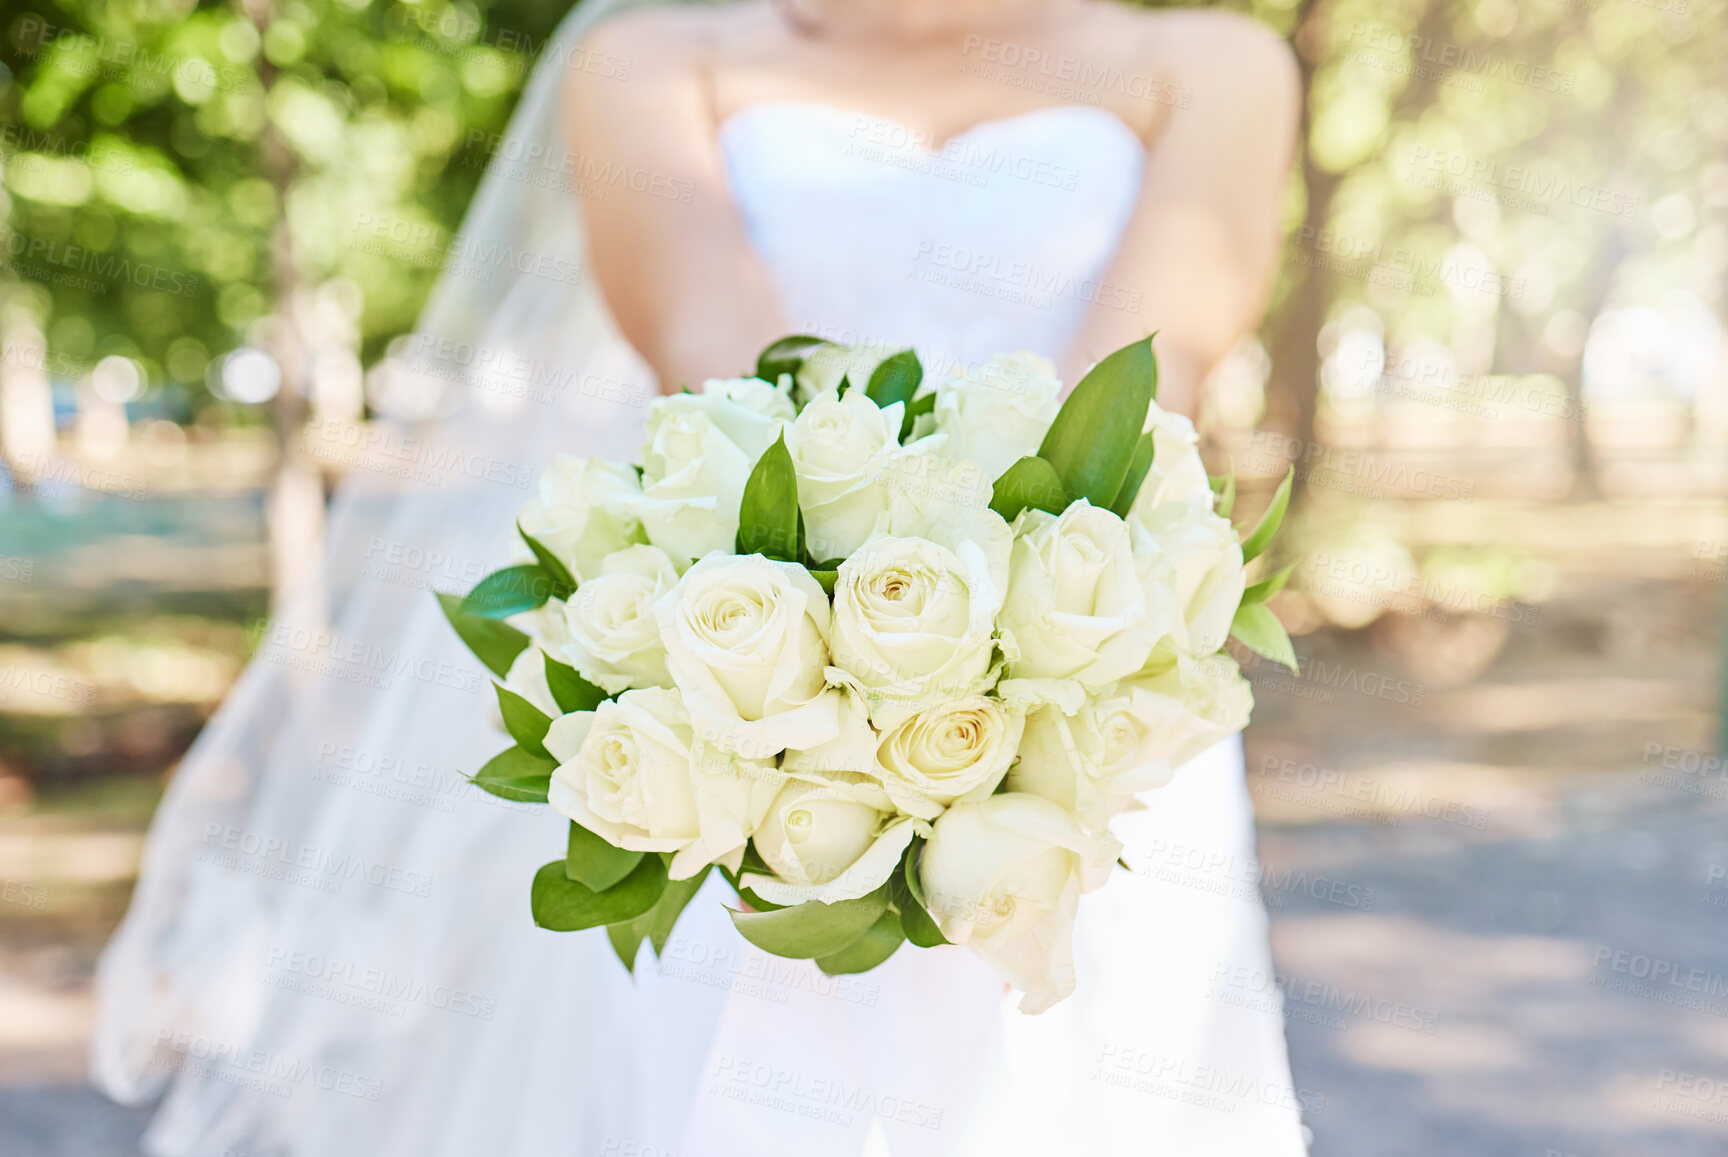 Buy stock photo Close up of bride holding a bouquet of flowers while standing outside on a sunny day. Beautiful wedding bouquet of white roses